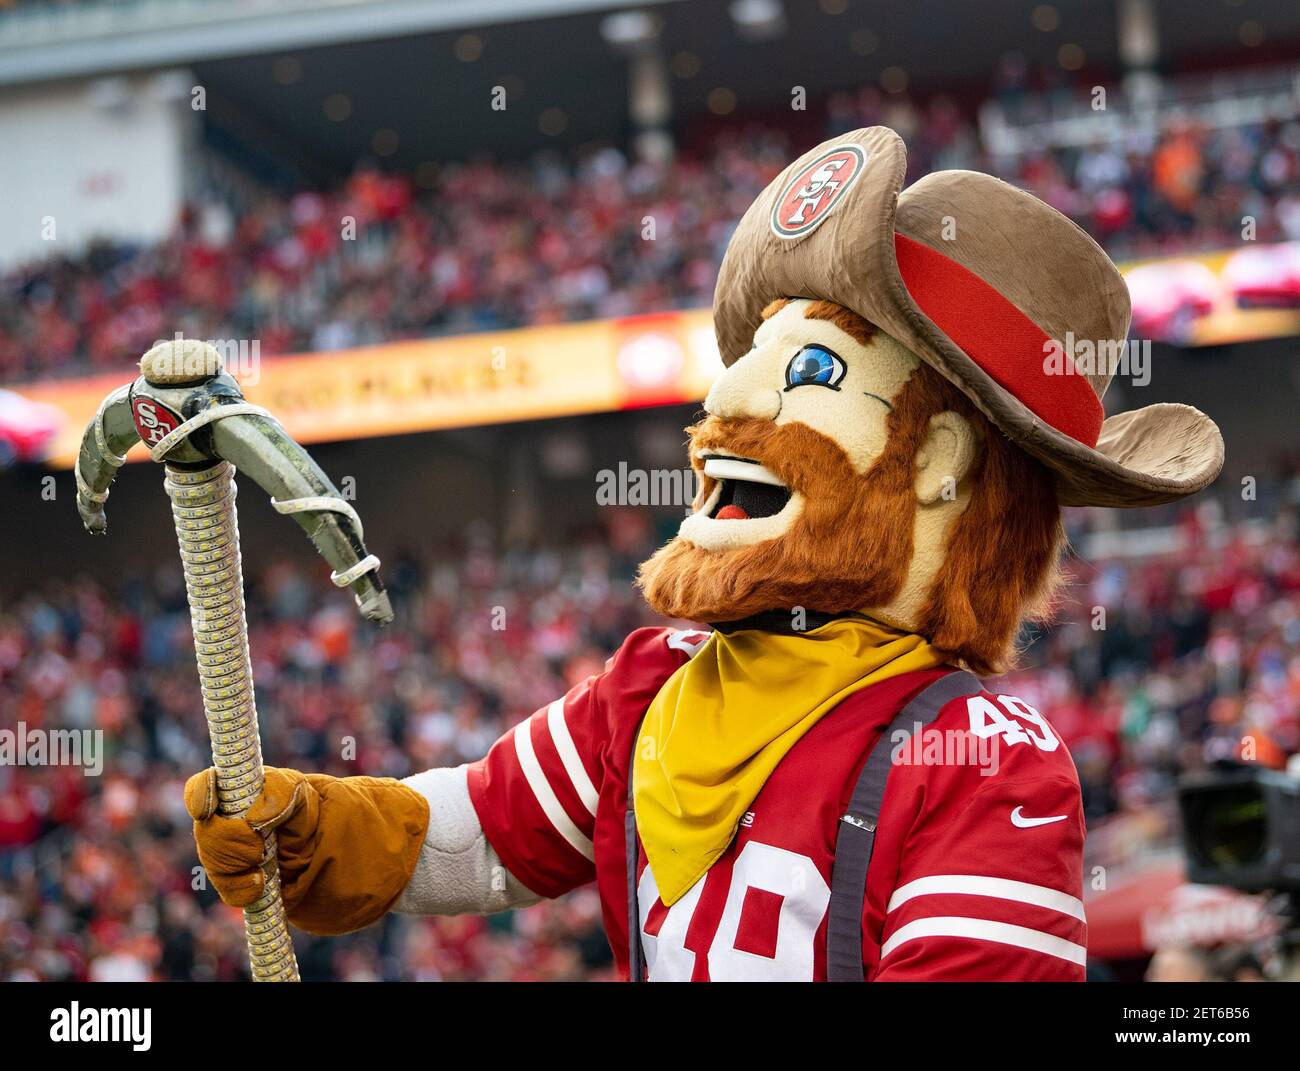 December 09, 2018: The 49ers mascot, Sourdough Sam, fires up the crowd,  during a NFL football game between the Denver Broncos and the San Francisco  49ers at the Levi's Stadium in Santa